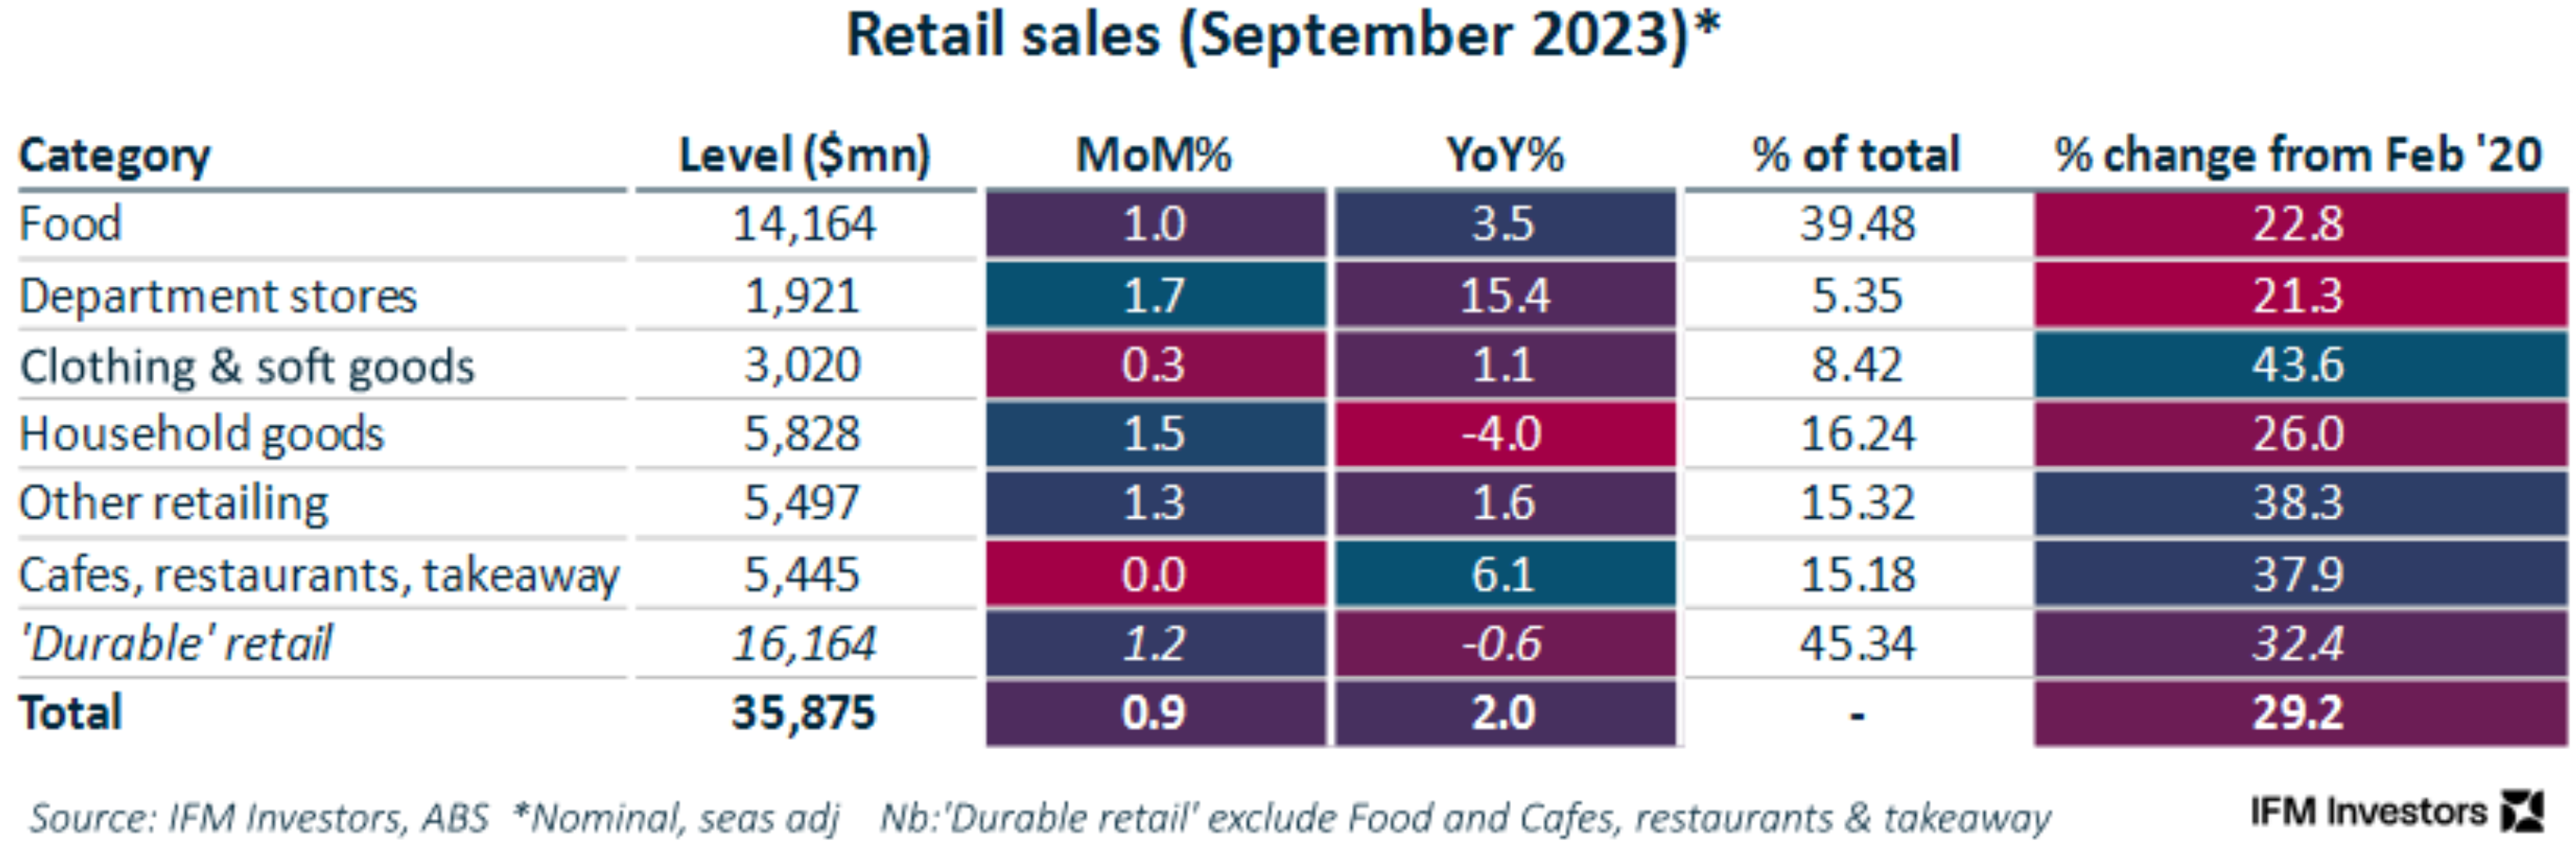 Retail sales by category